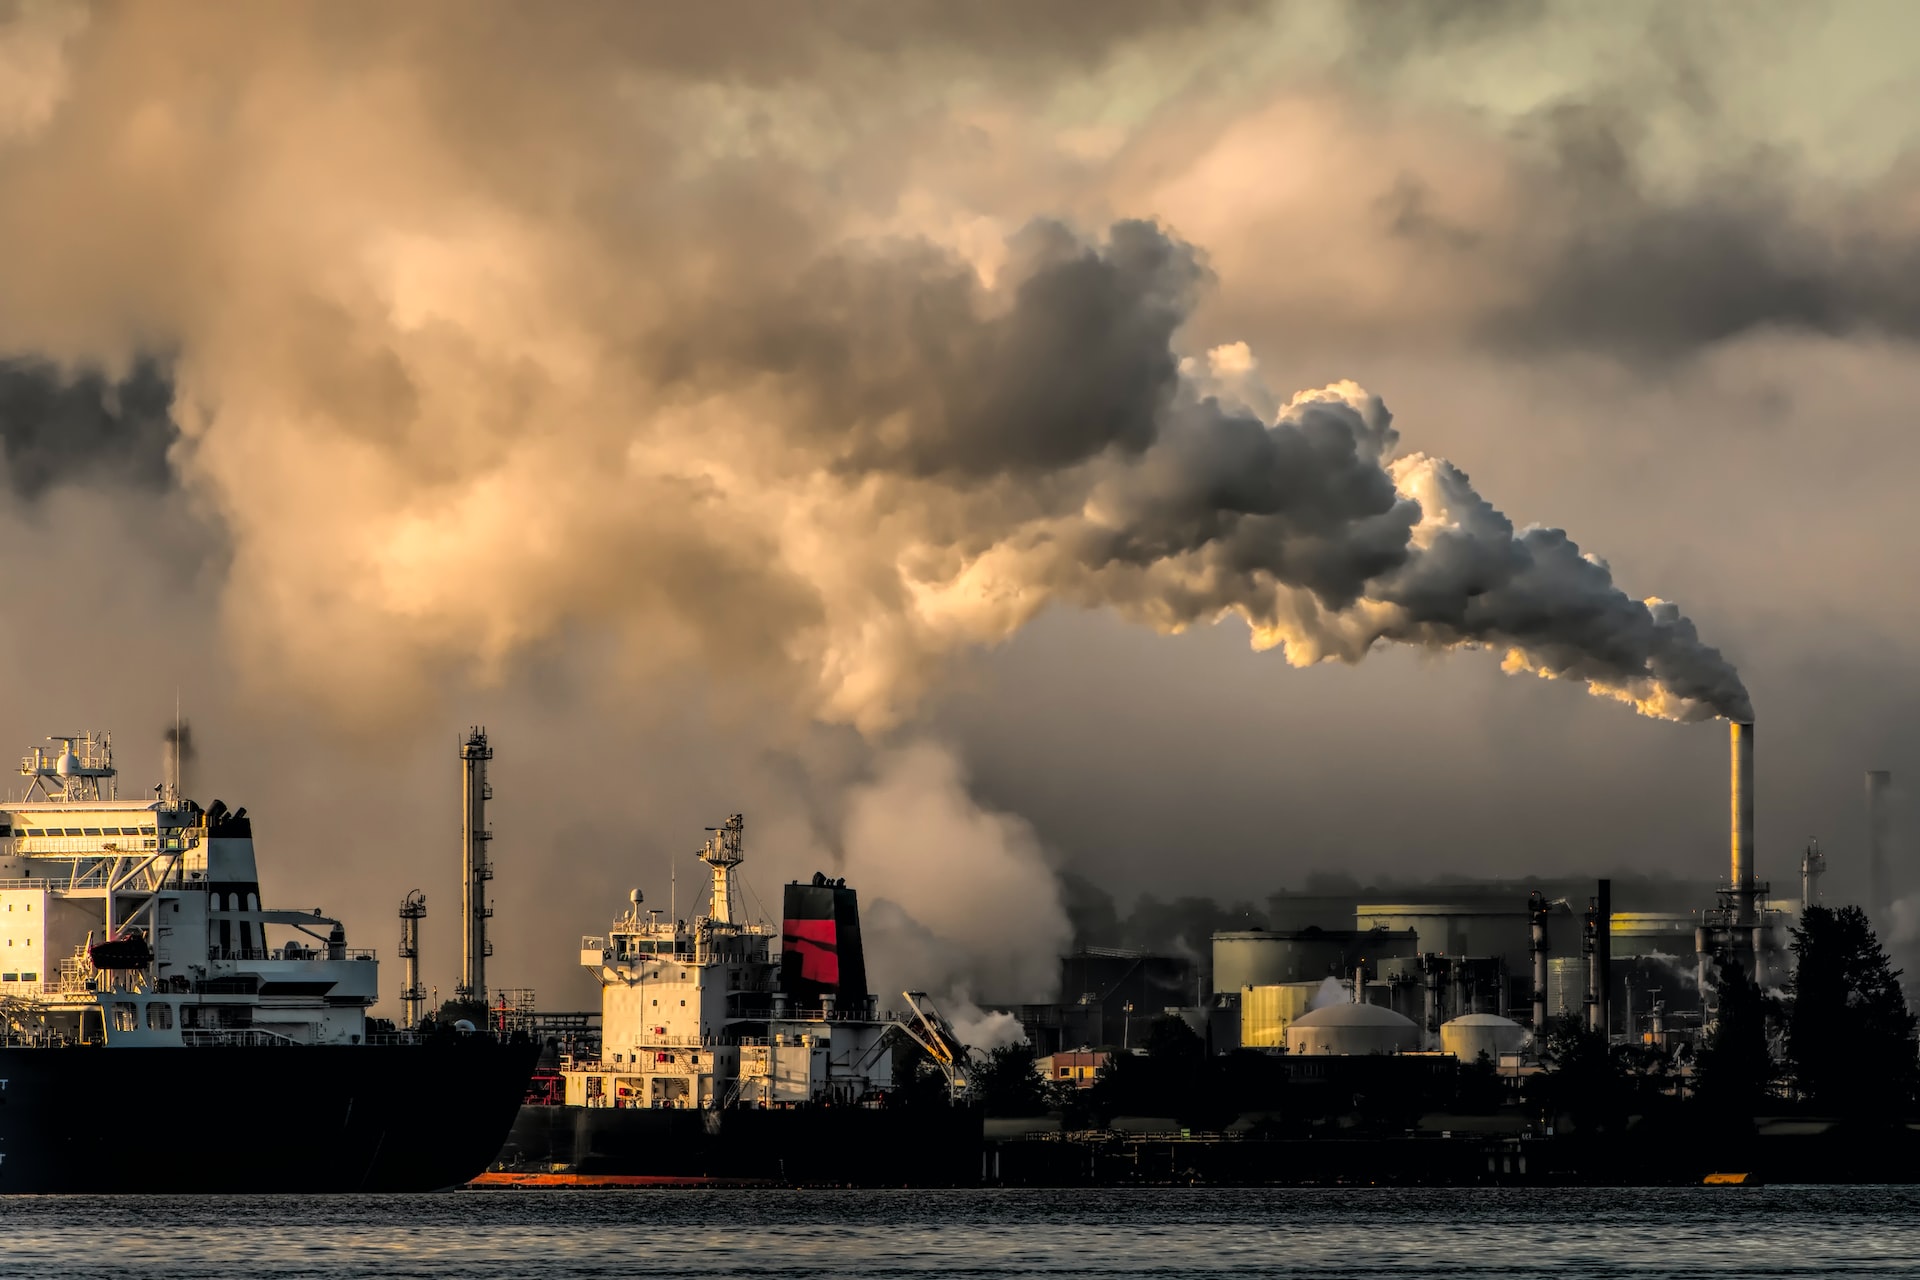 Environmental pollution from factories